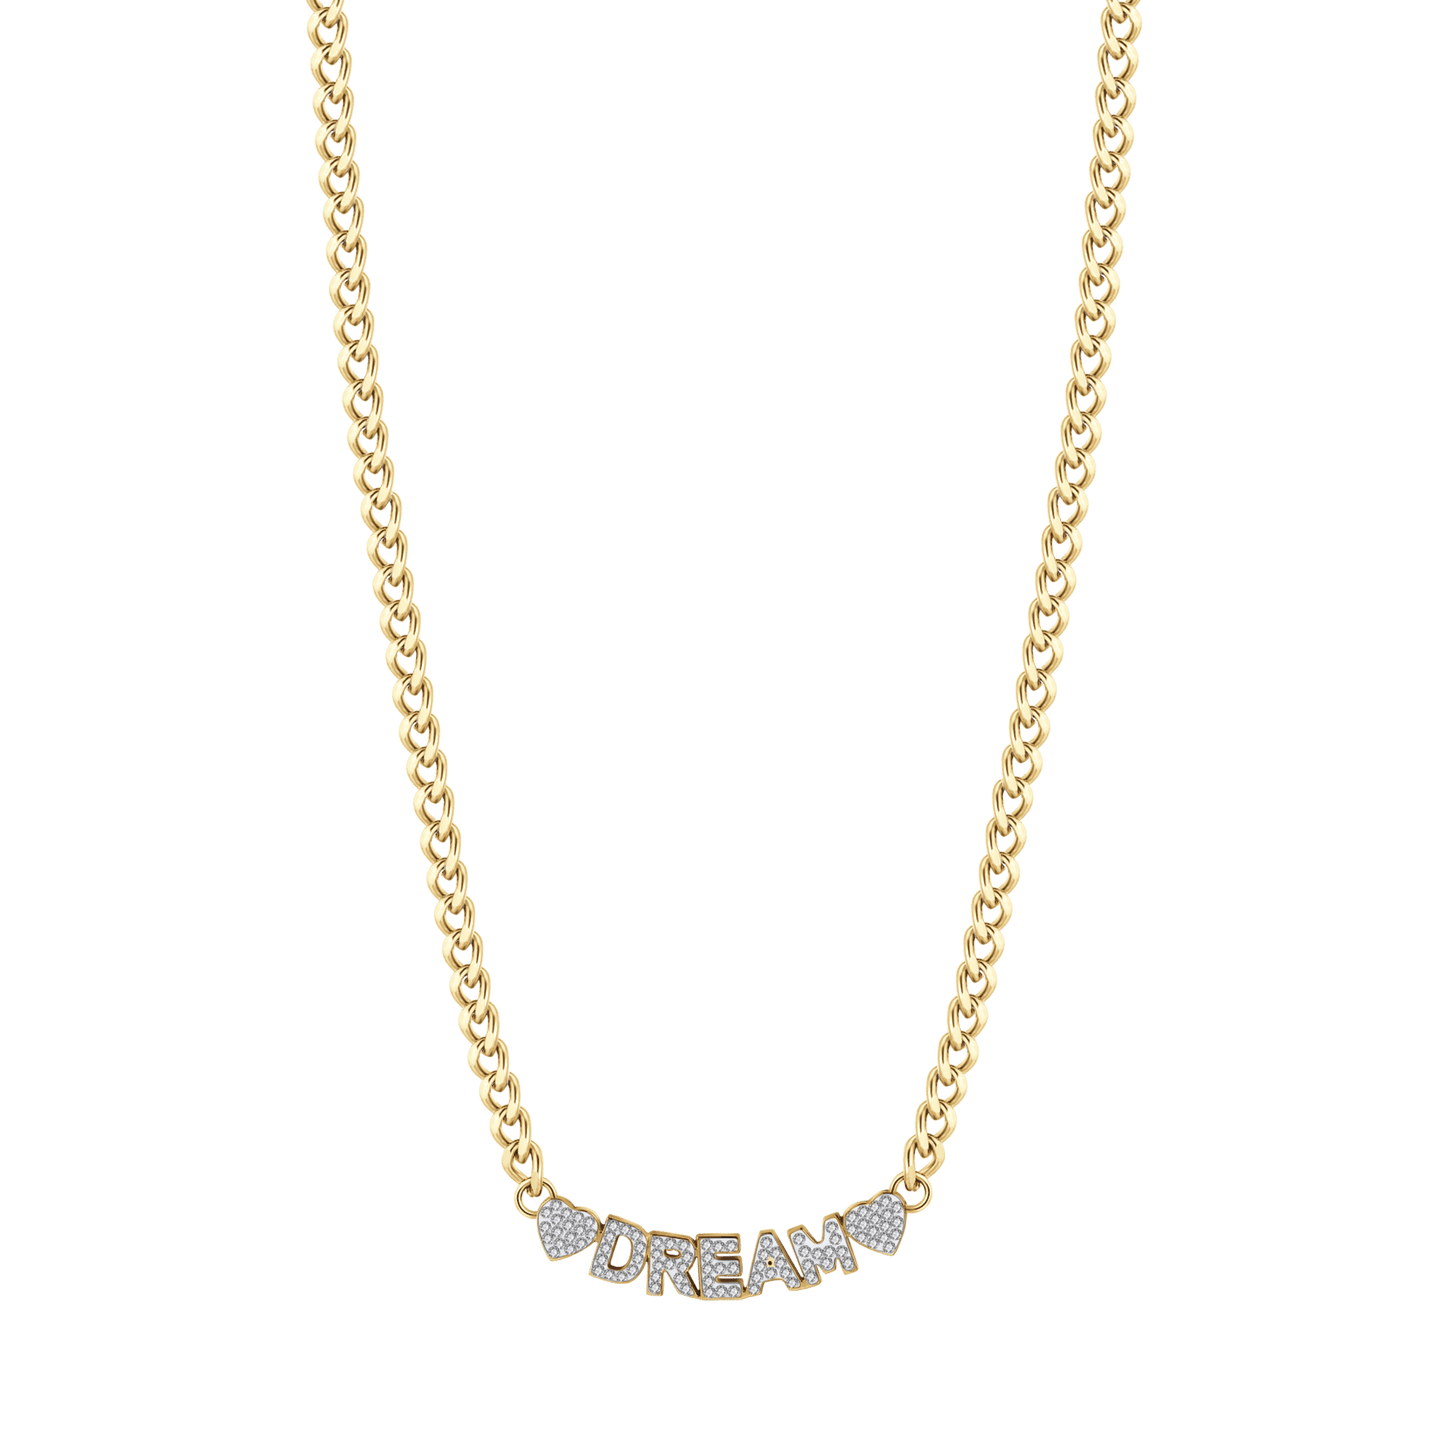 WOMEN'S GOLD STEEL DREAM NECKLACE WITH WHITE CRYSTALS